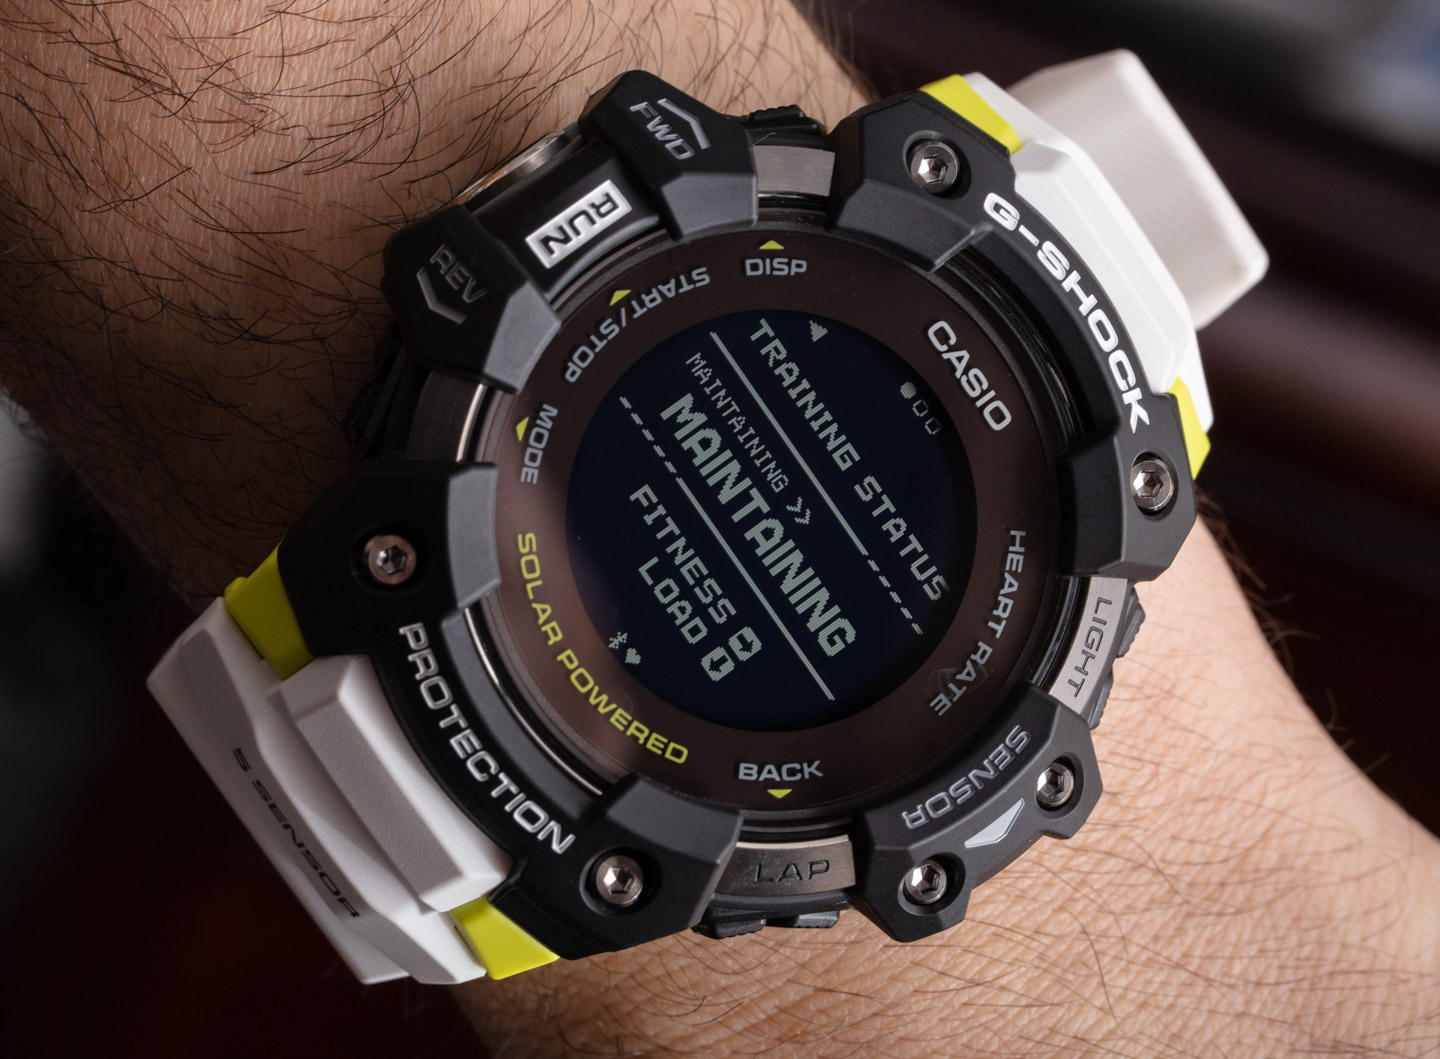 Watch Review: Casio G-Shock Move GBD-H1000 GPS Heart-Rate Monitor